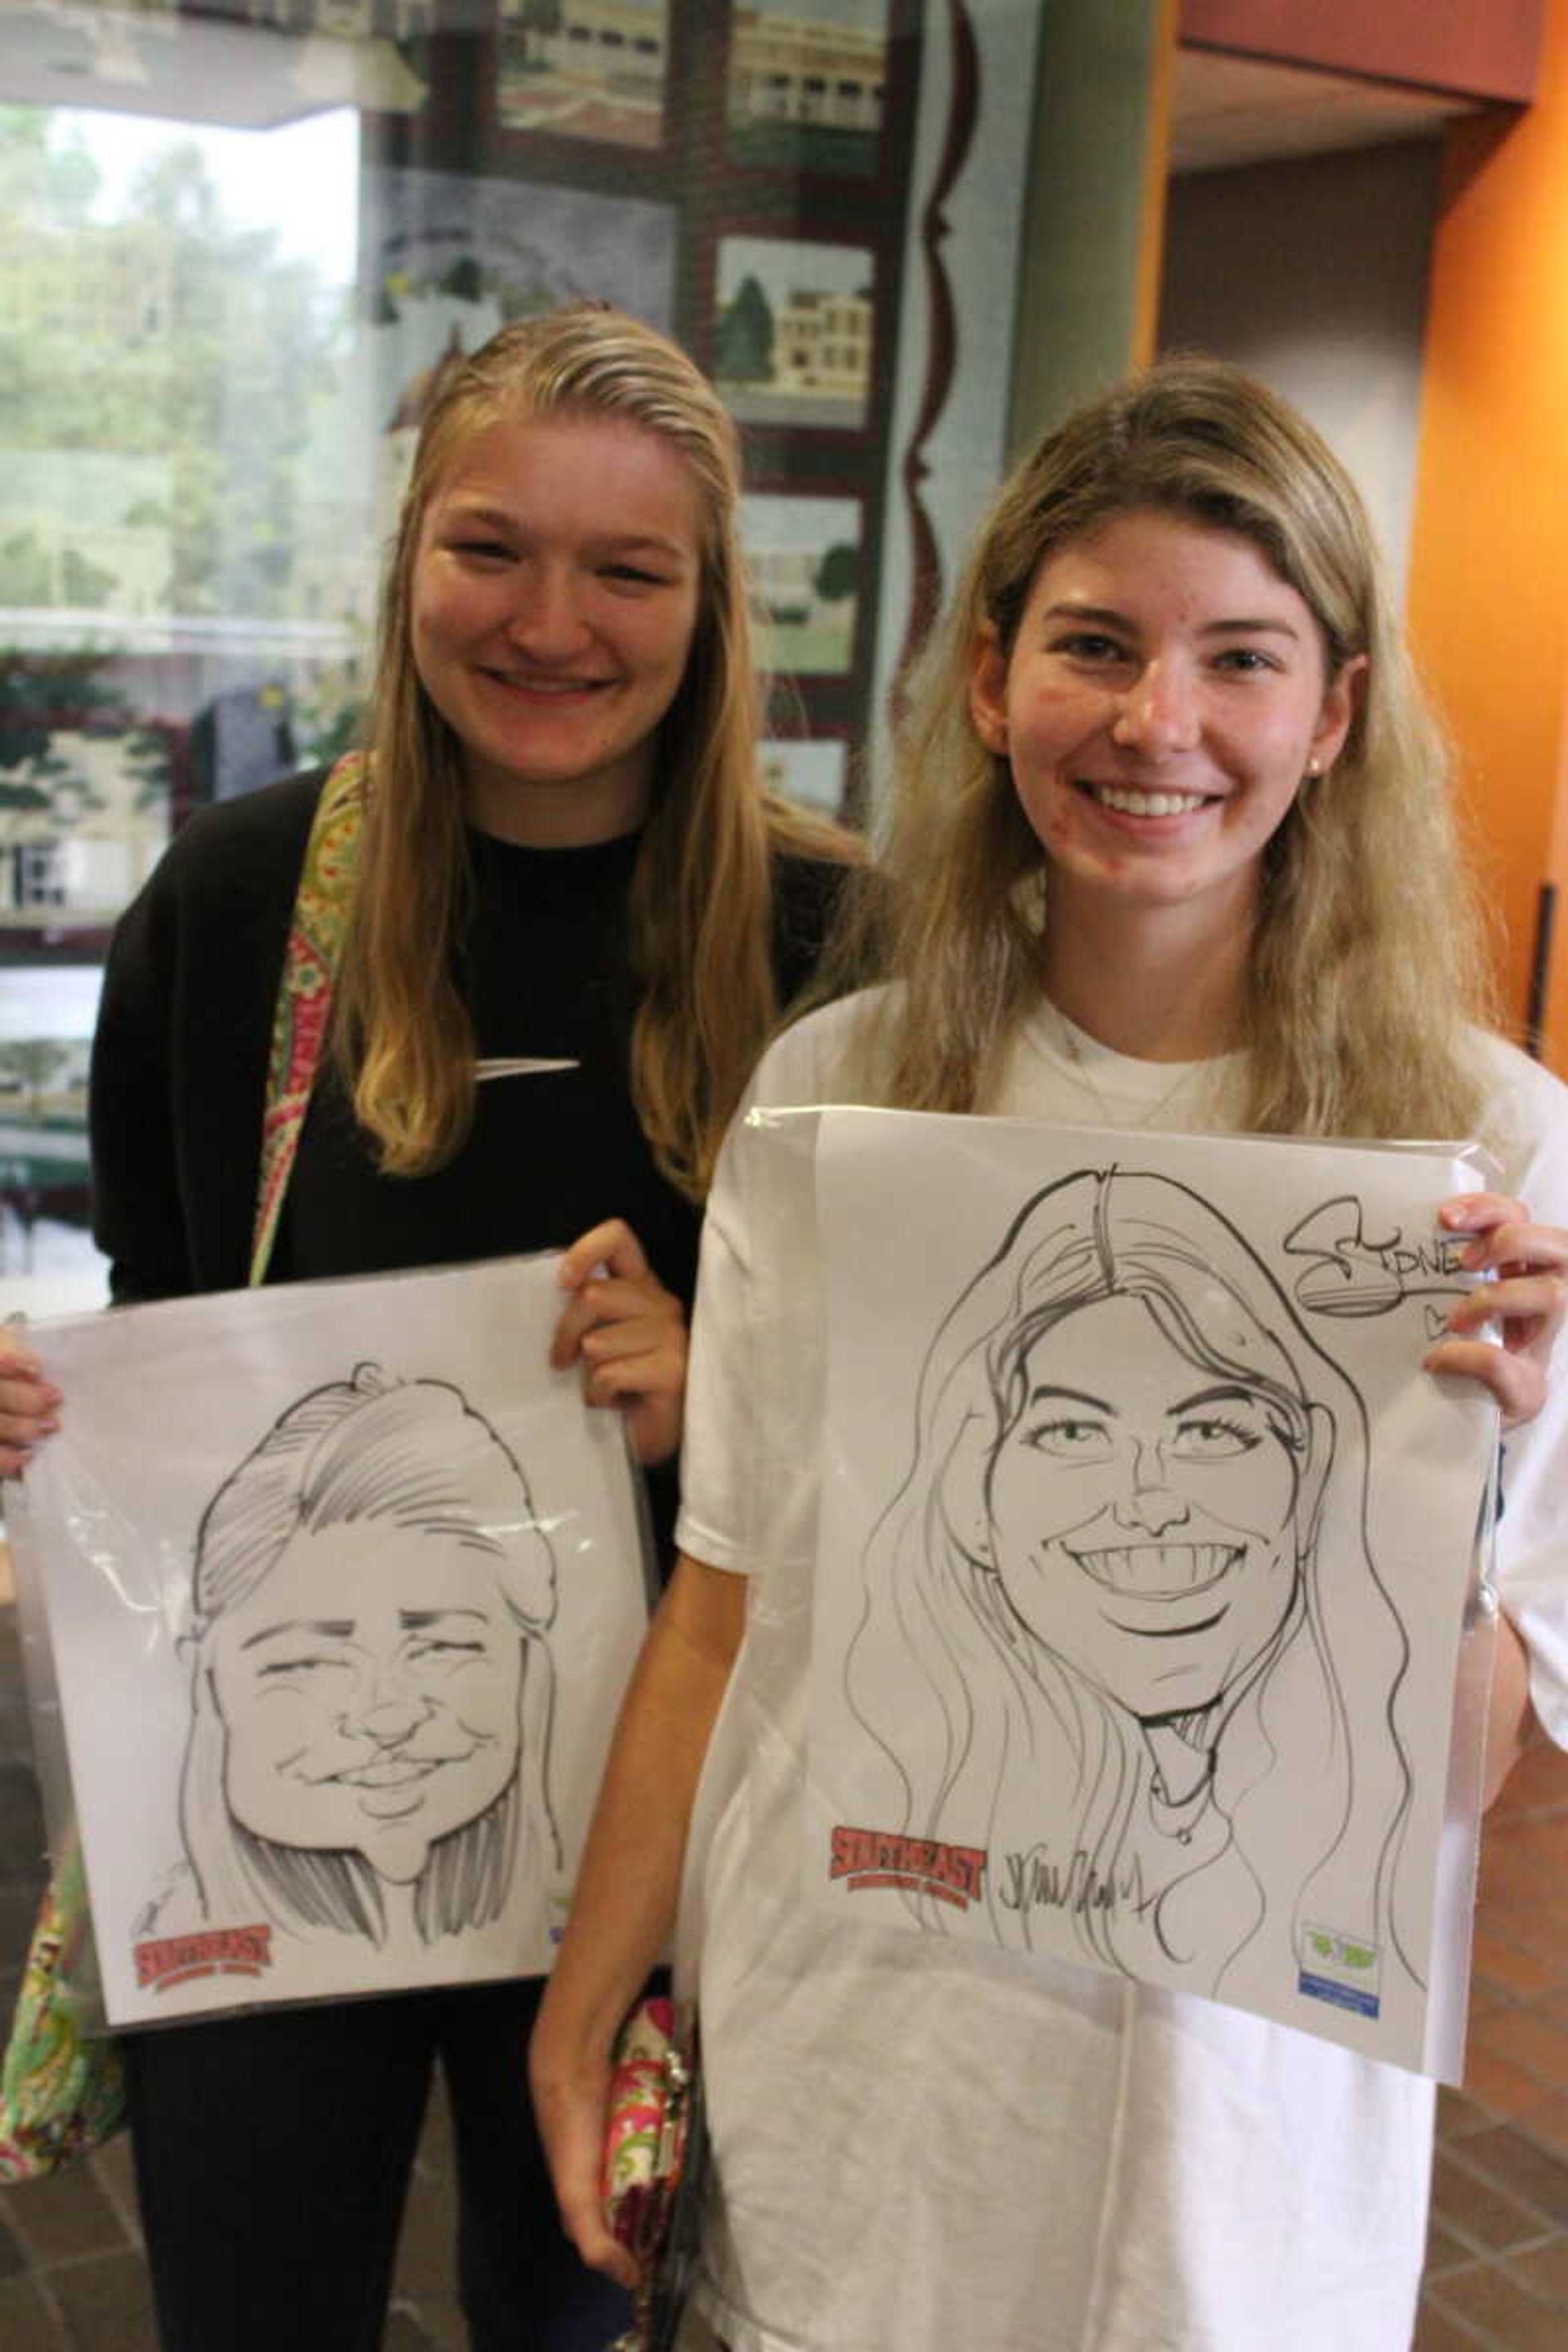 Sydney Dittlinger and Kaylee Backfisch pose with their Caricature in the UC on Oct. 11.